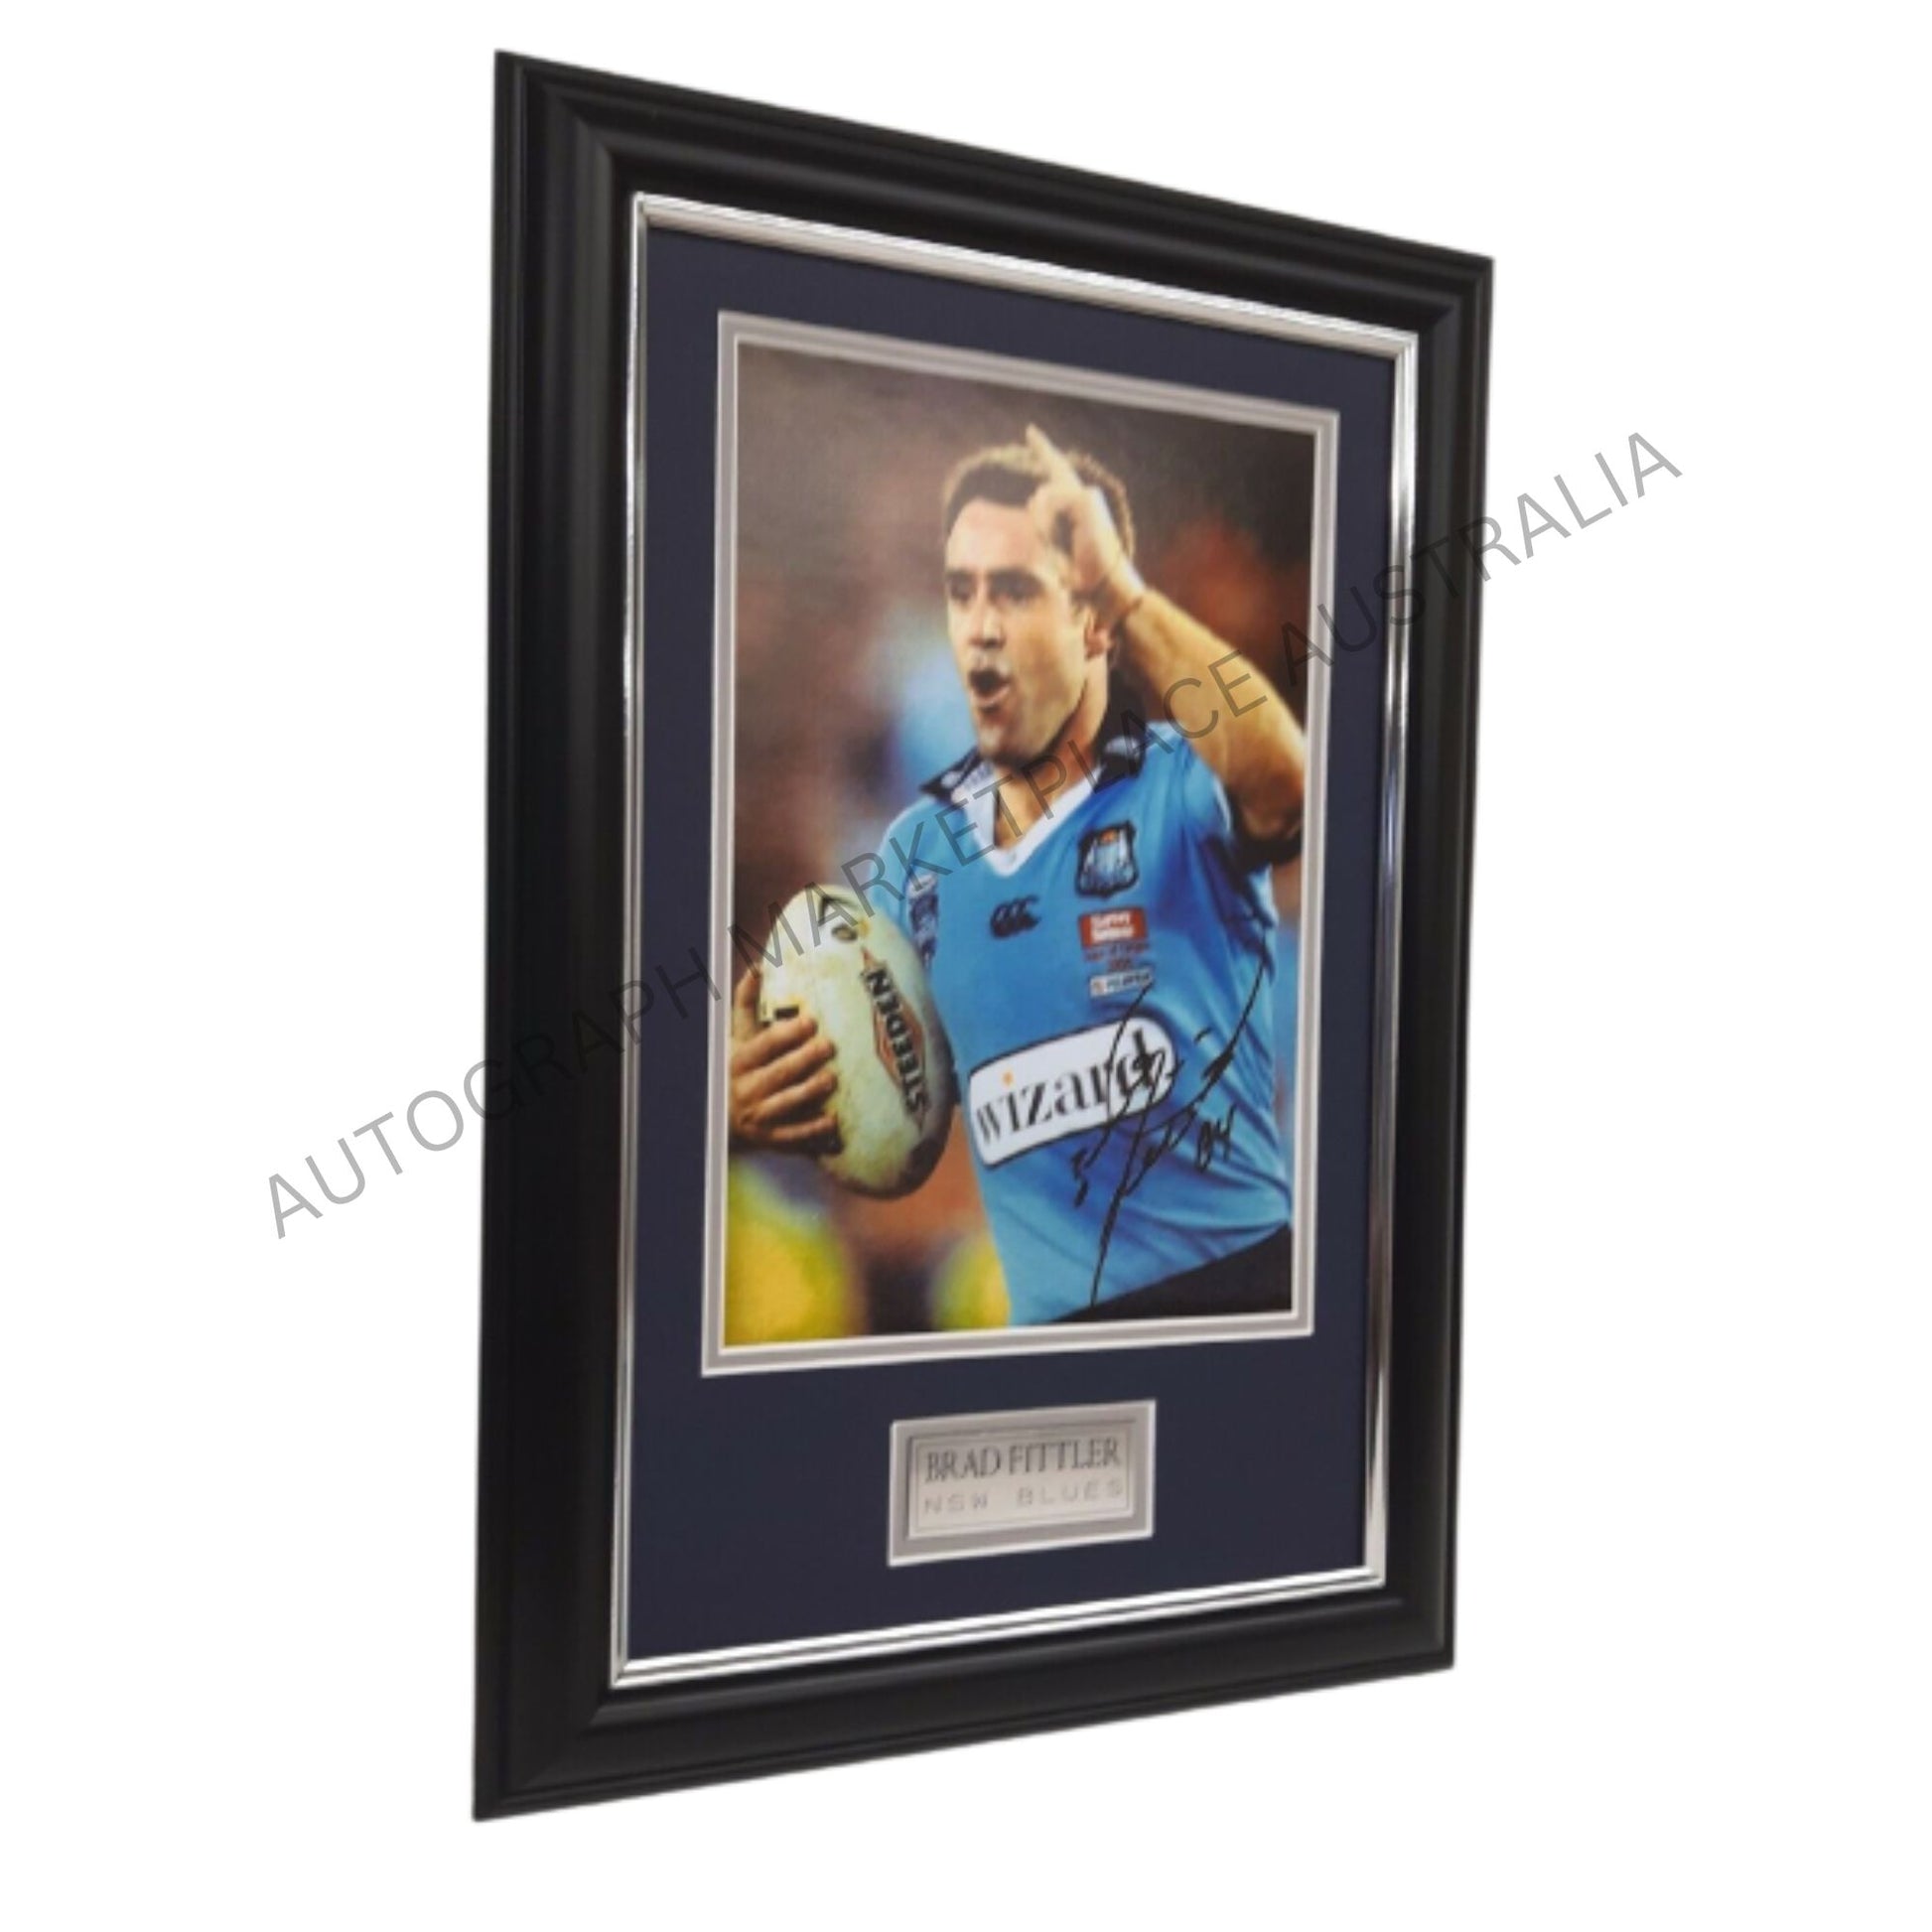 Brad Fittler NSW Blues Legend Signed Action Photo